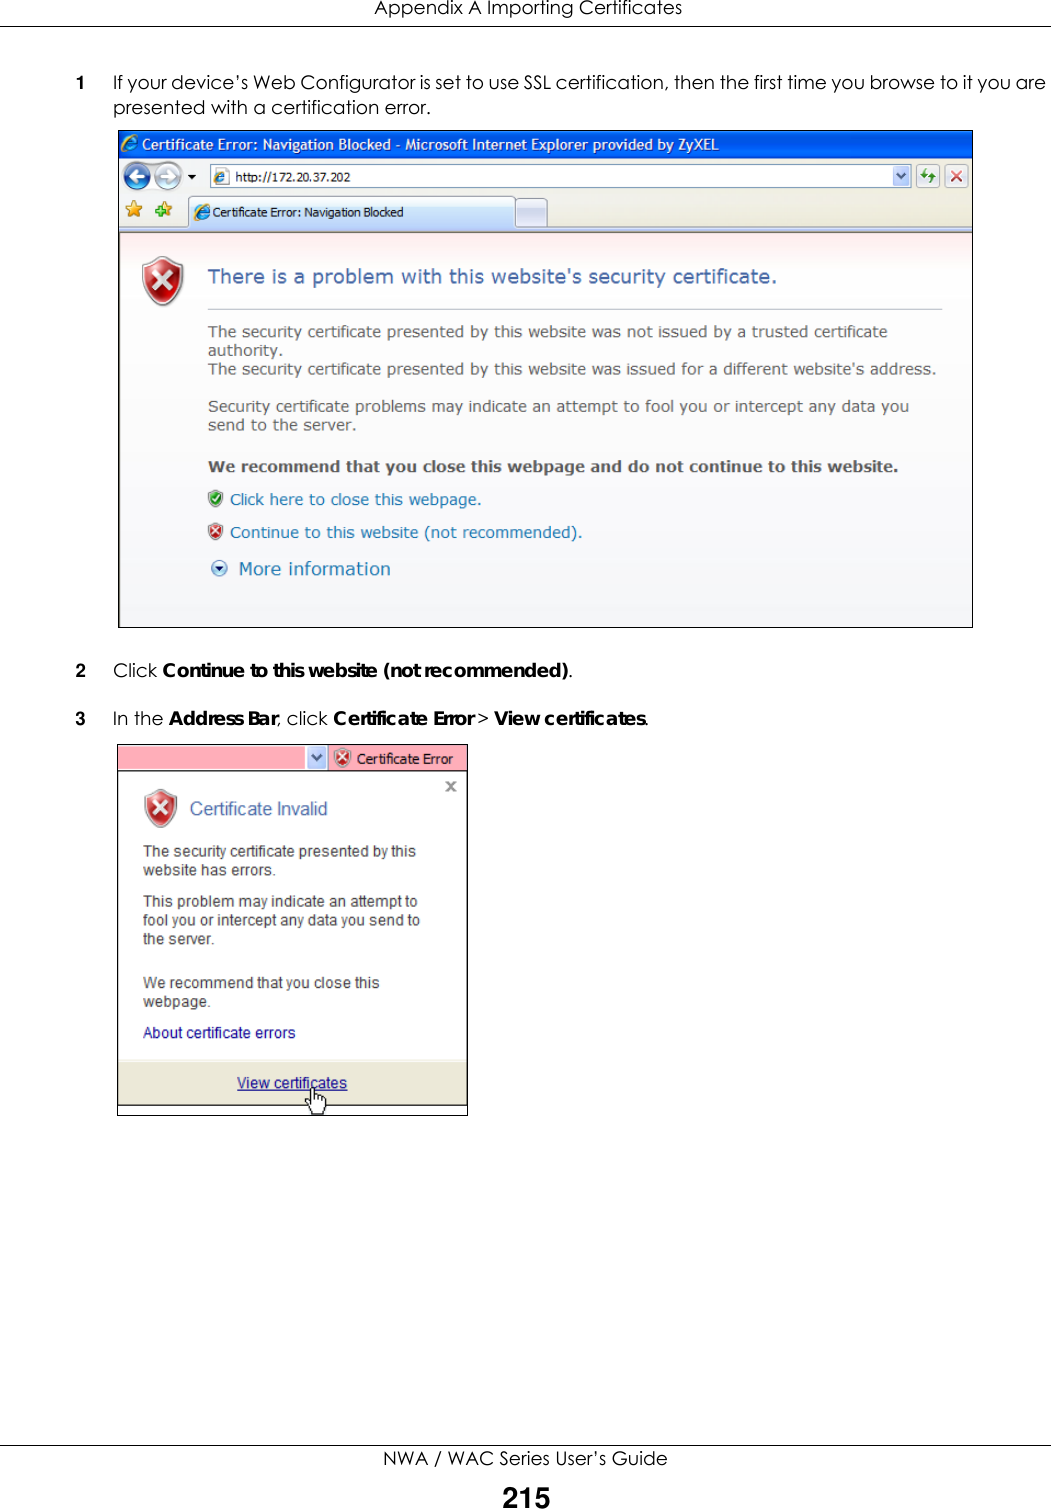  Appendix A Importing CertificatesNWA / WAC Series User’s Guide2151If your device’s Web Configurator is set to use SSL certification, then the first time you browse to it you are presented with a certification error.2Click Continue to this website (not recommended).3In the Address Bar, click Certificate Error &gt; View certificates.